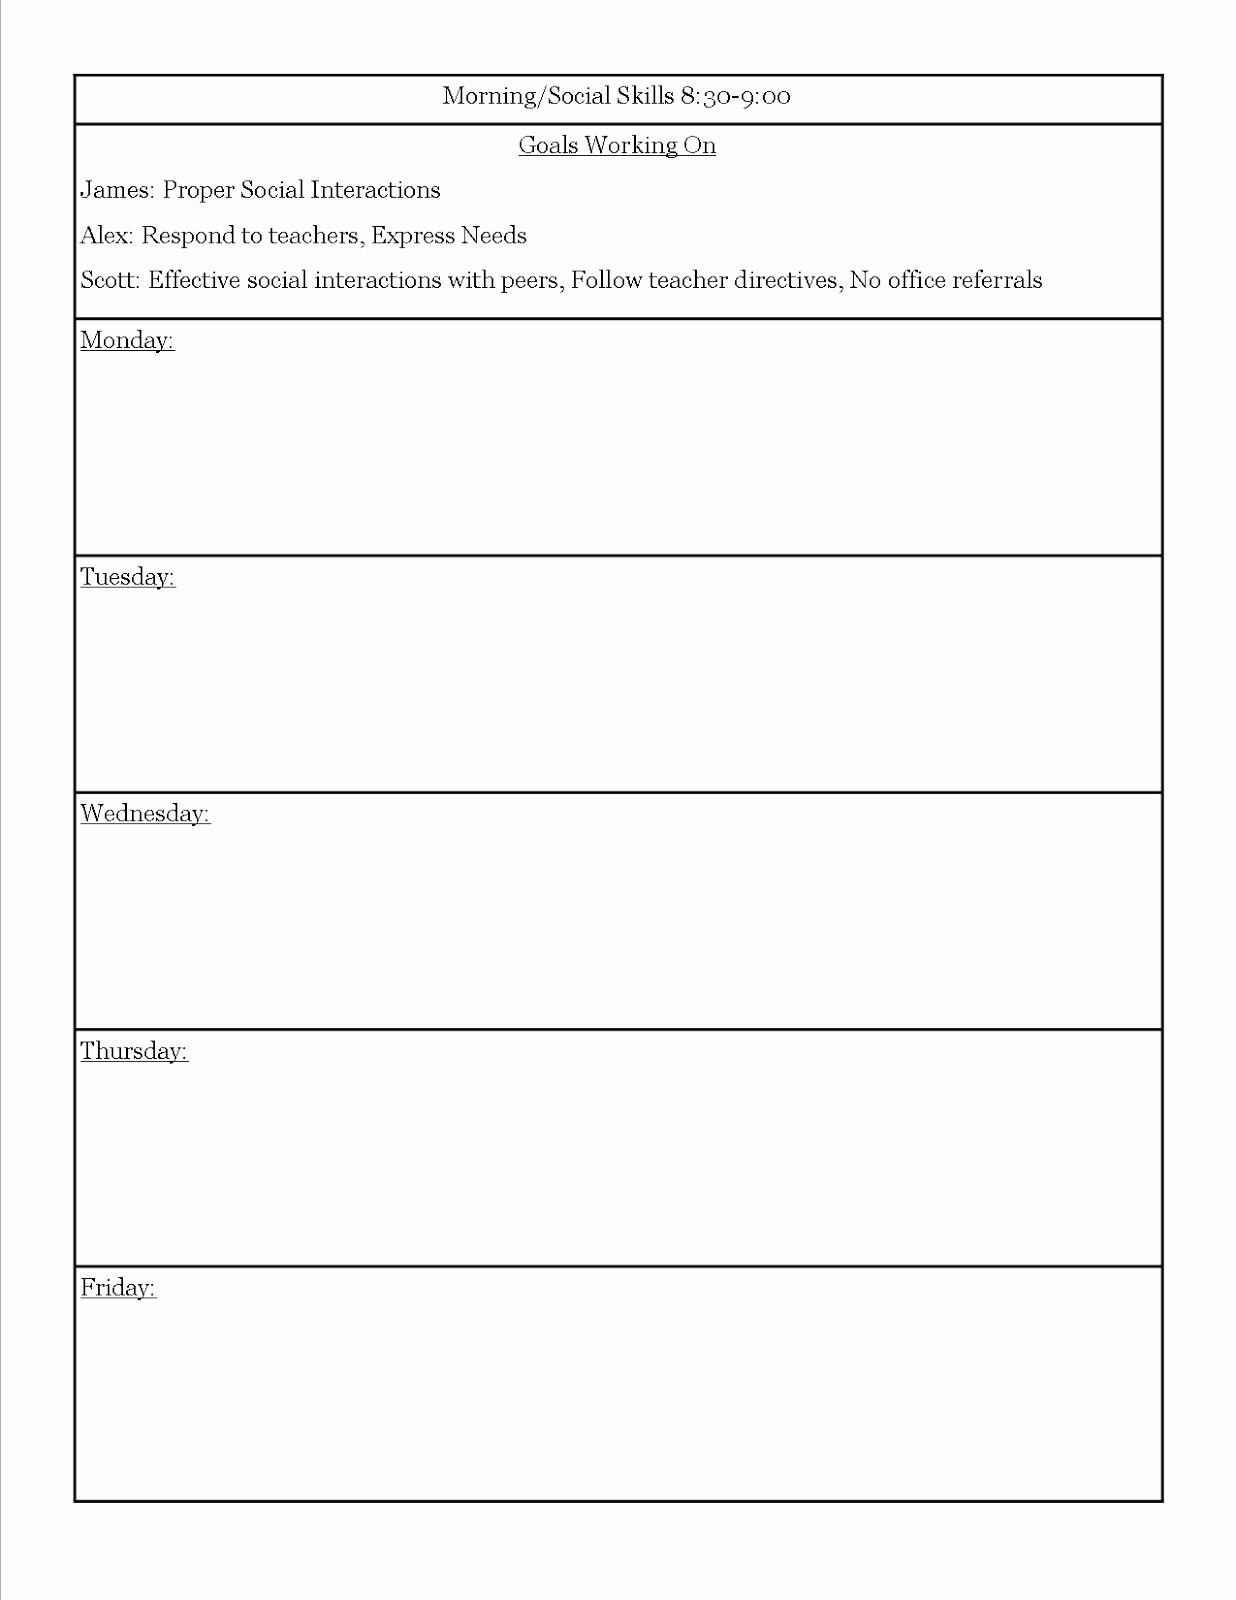 Special Ed Lesson Plan Templates Elegant A Special Sparkle Tips for New Special Ed Teachers Getting organized with Your Lesson Plans